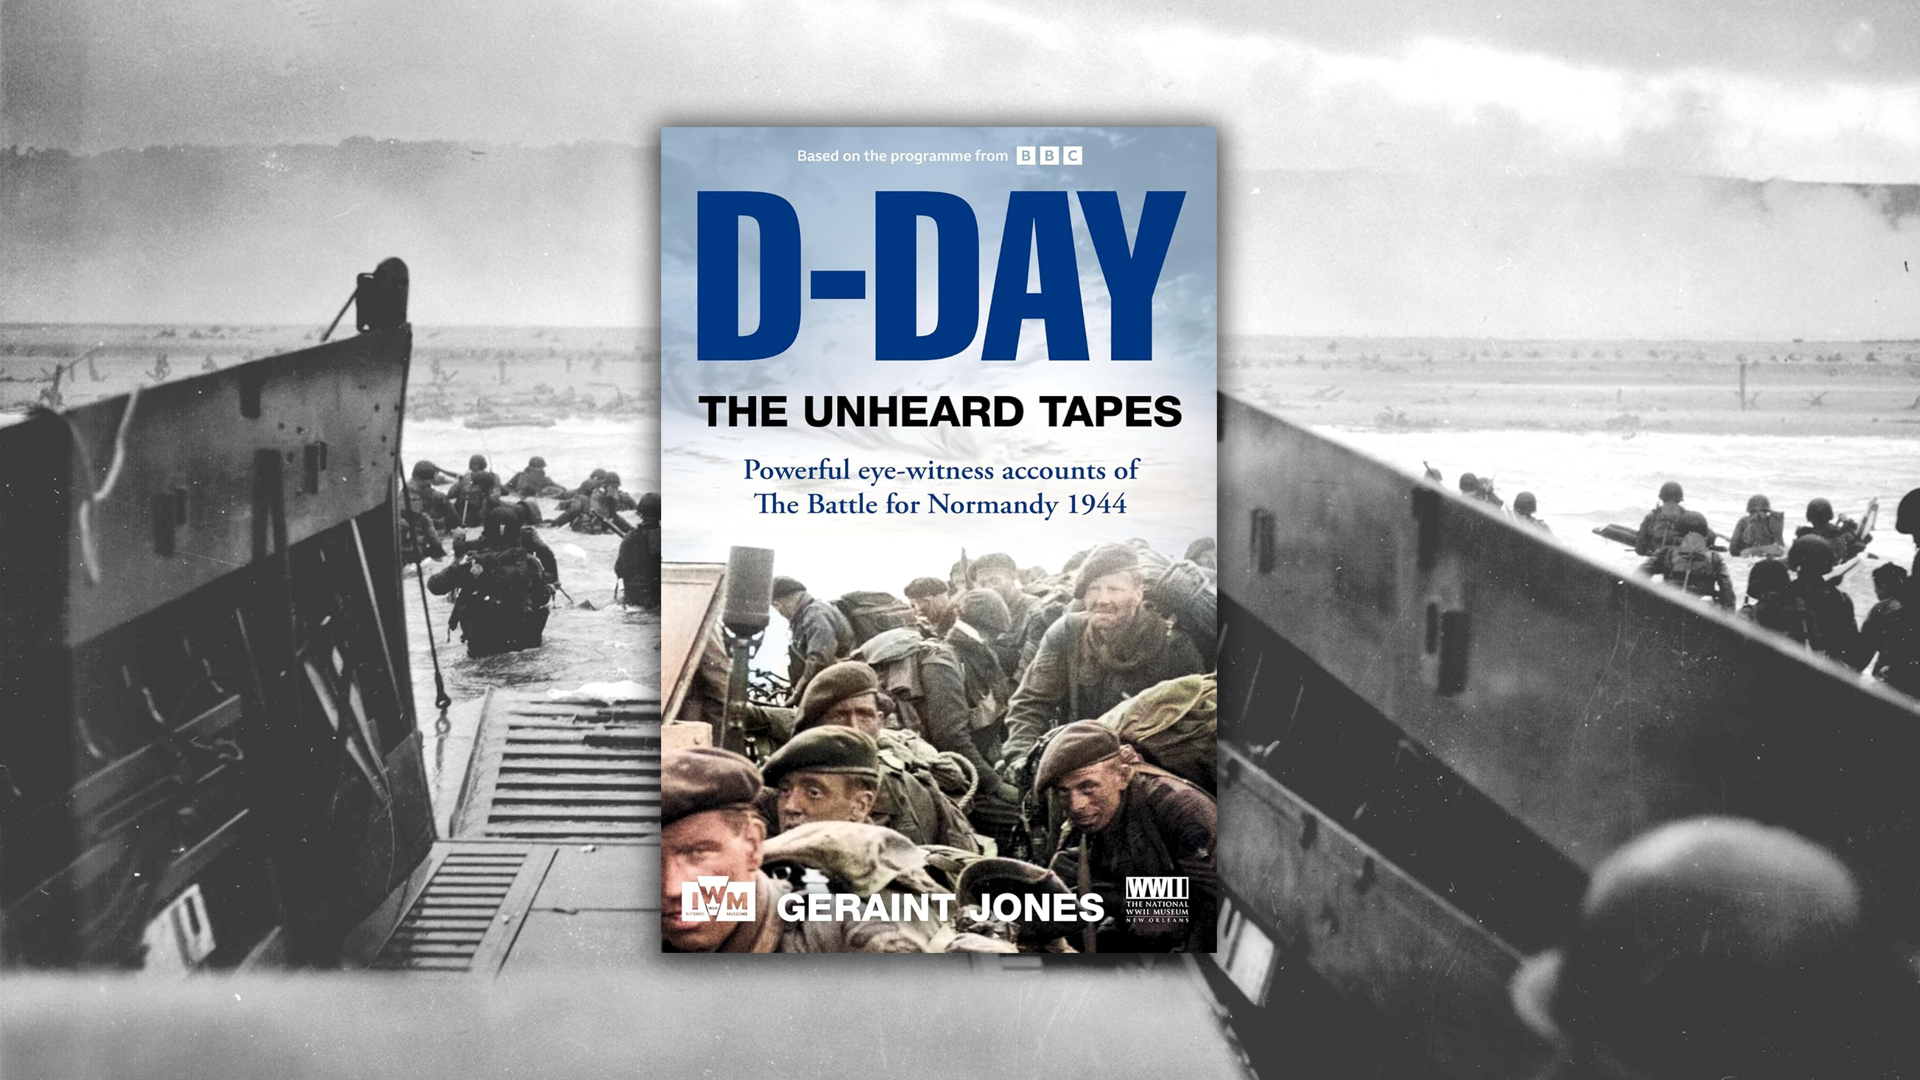 New book reveals ‘unheard’ details about D-Day invasion